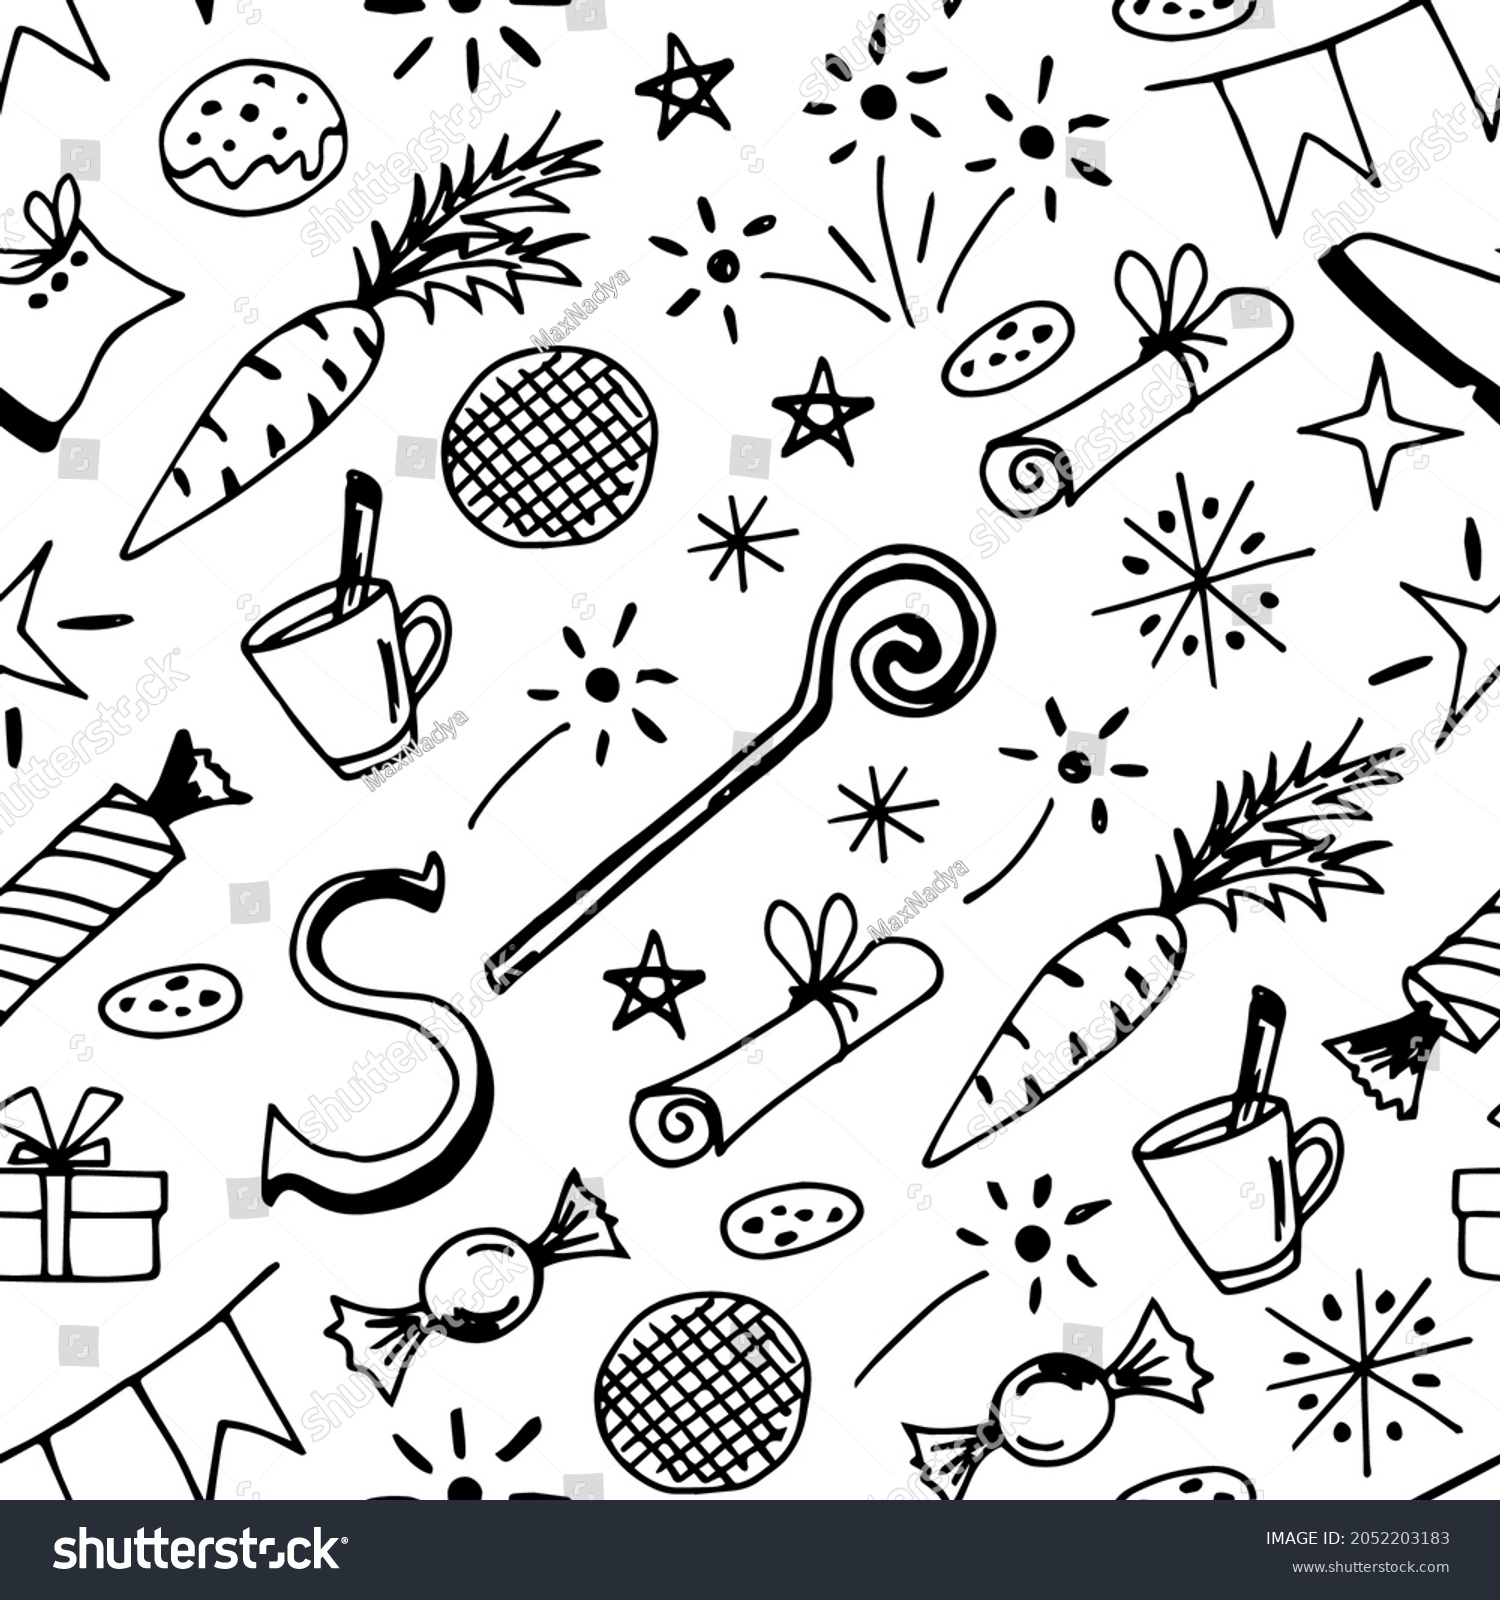 Simple hand-drawn vector seamless pattern in doodle style. Celebration of St. Nicholas Day, Sinterklaas. For prints of wrapping paper, gifts, textile products. #2052203183